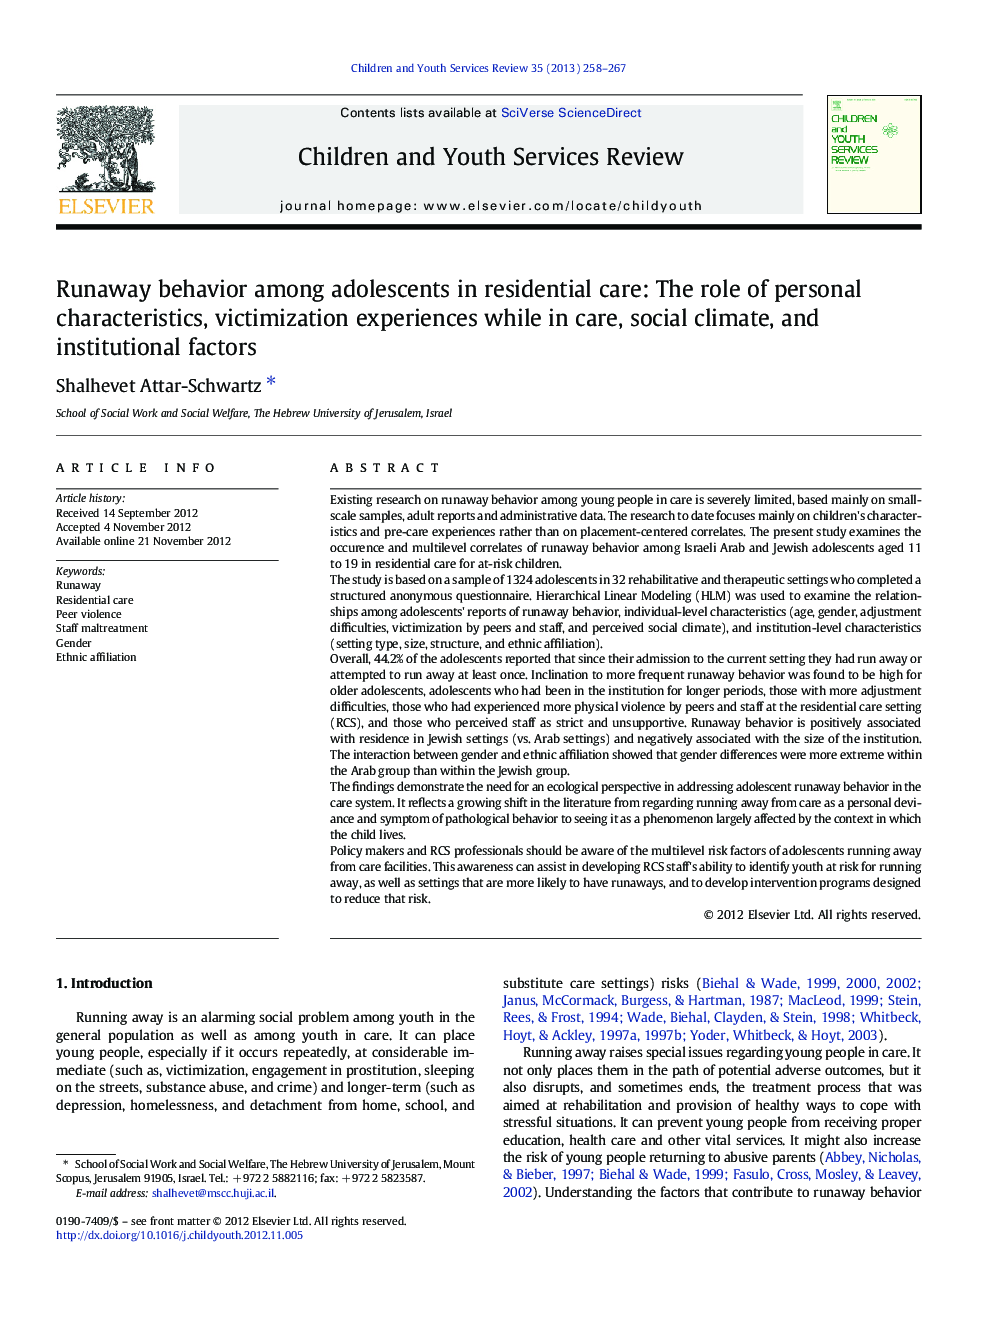 Runaway behavior among adolescents in residential care: The role of personal characteristics, victimization experiences while in care, social climate, and institutional factors